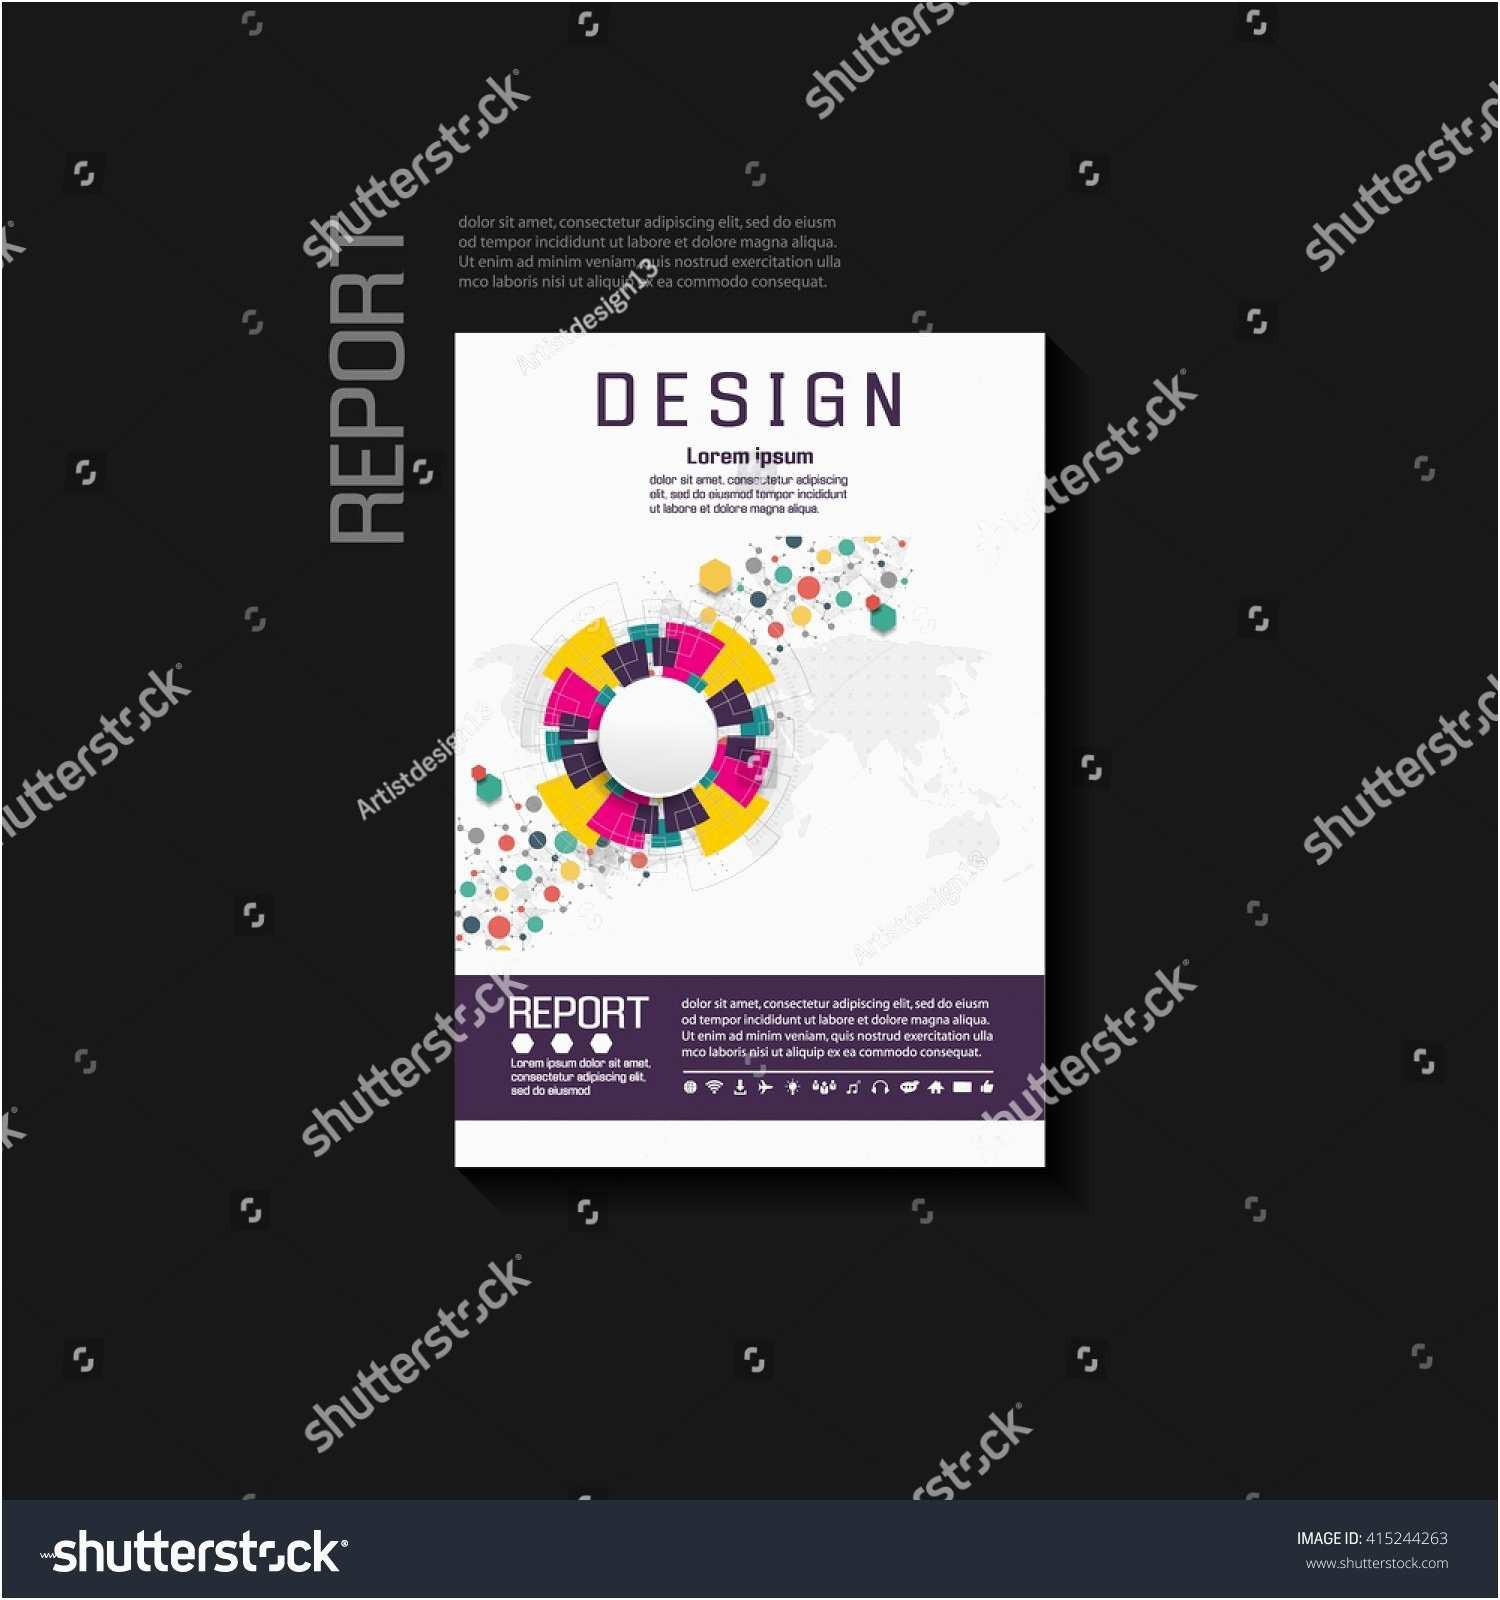 Personal Business Card Template Illustrator Free Word Of Free Business Card Template Download Word